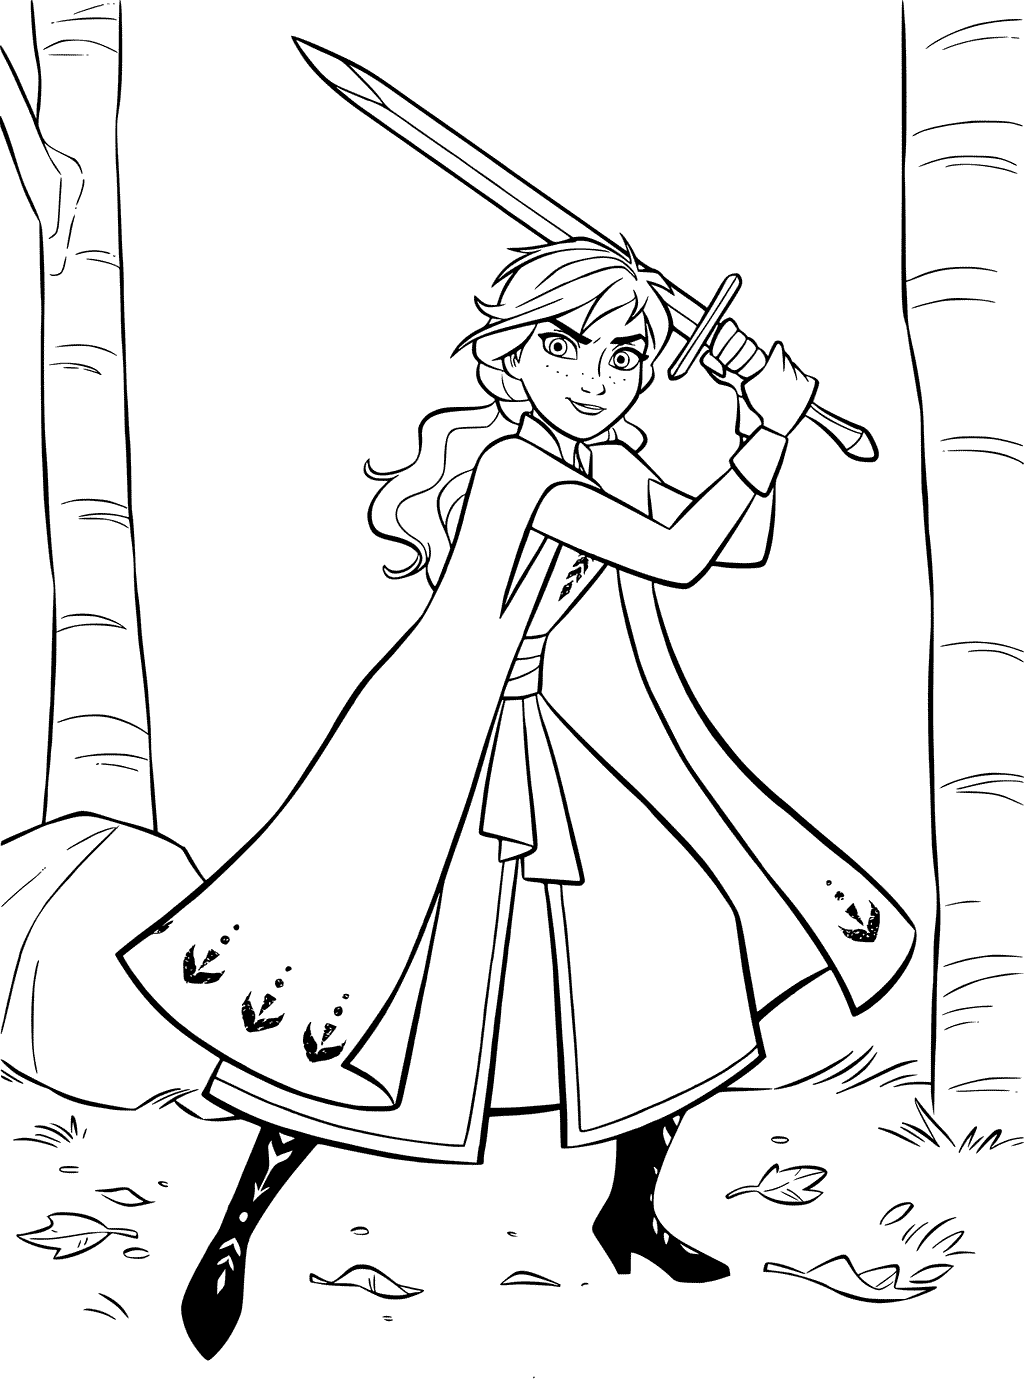 Anna With Sword Coloring Page